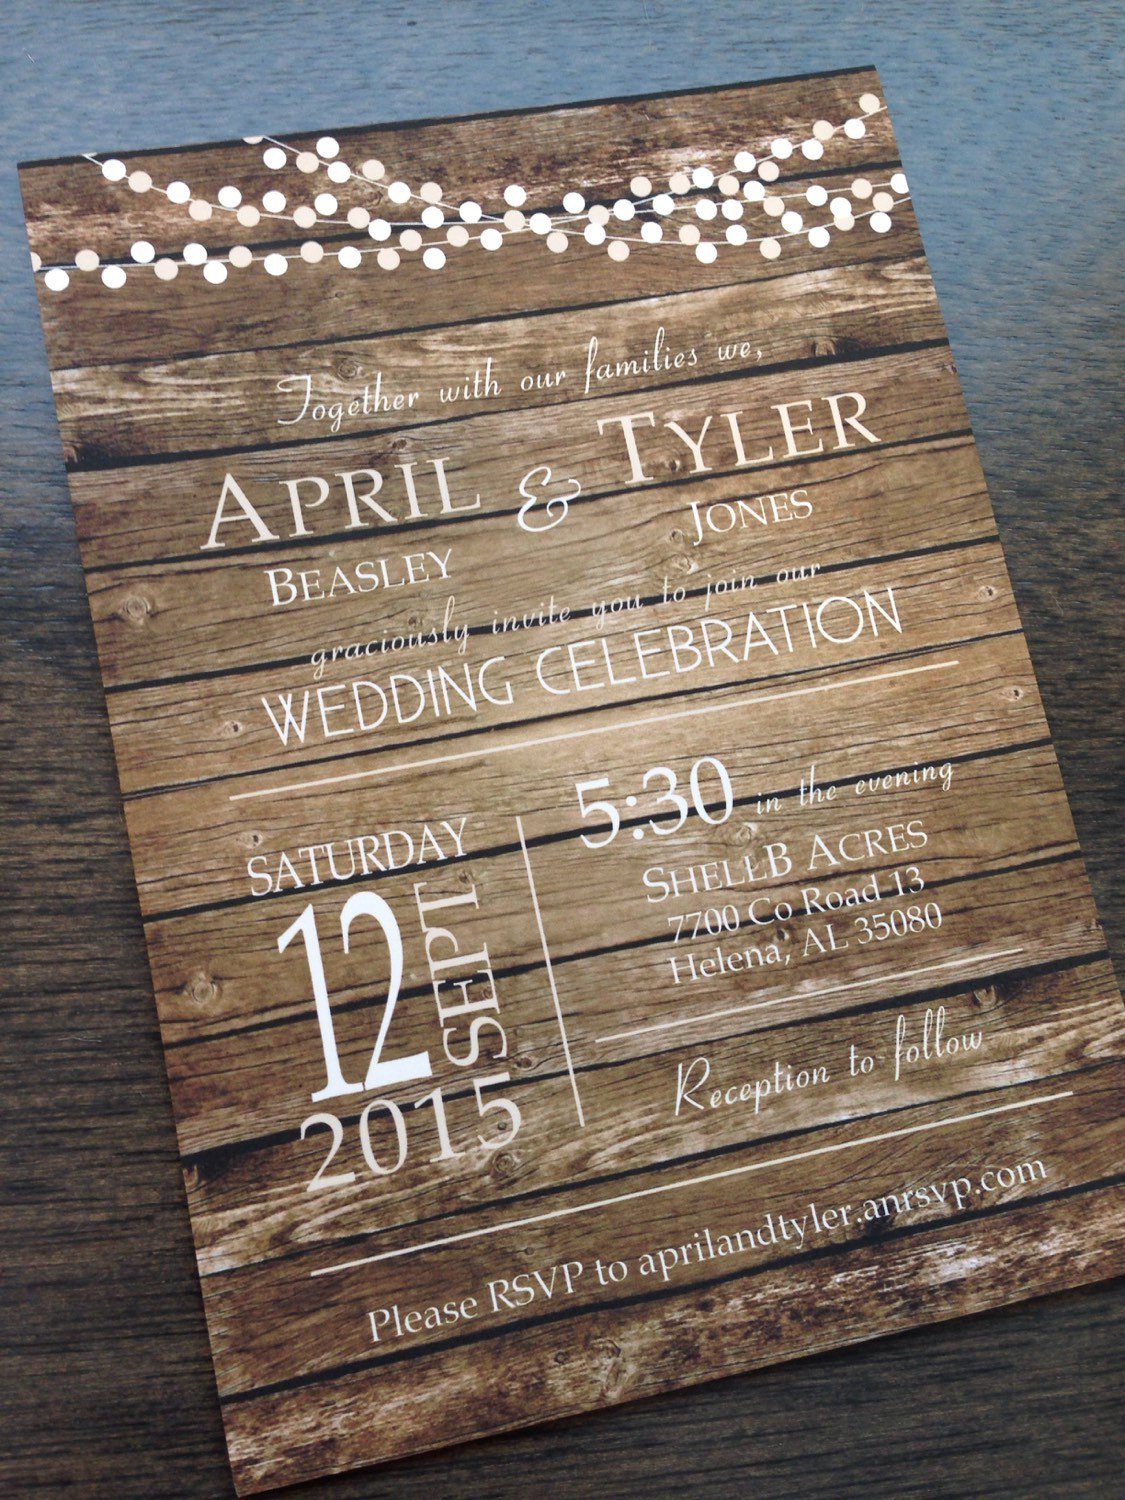 Wedding Party with Rustic Country Wedding Invitations